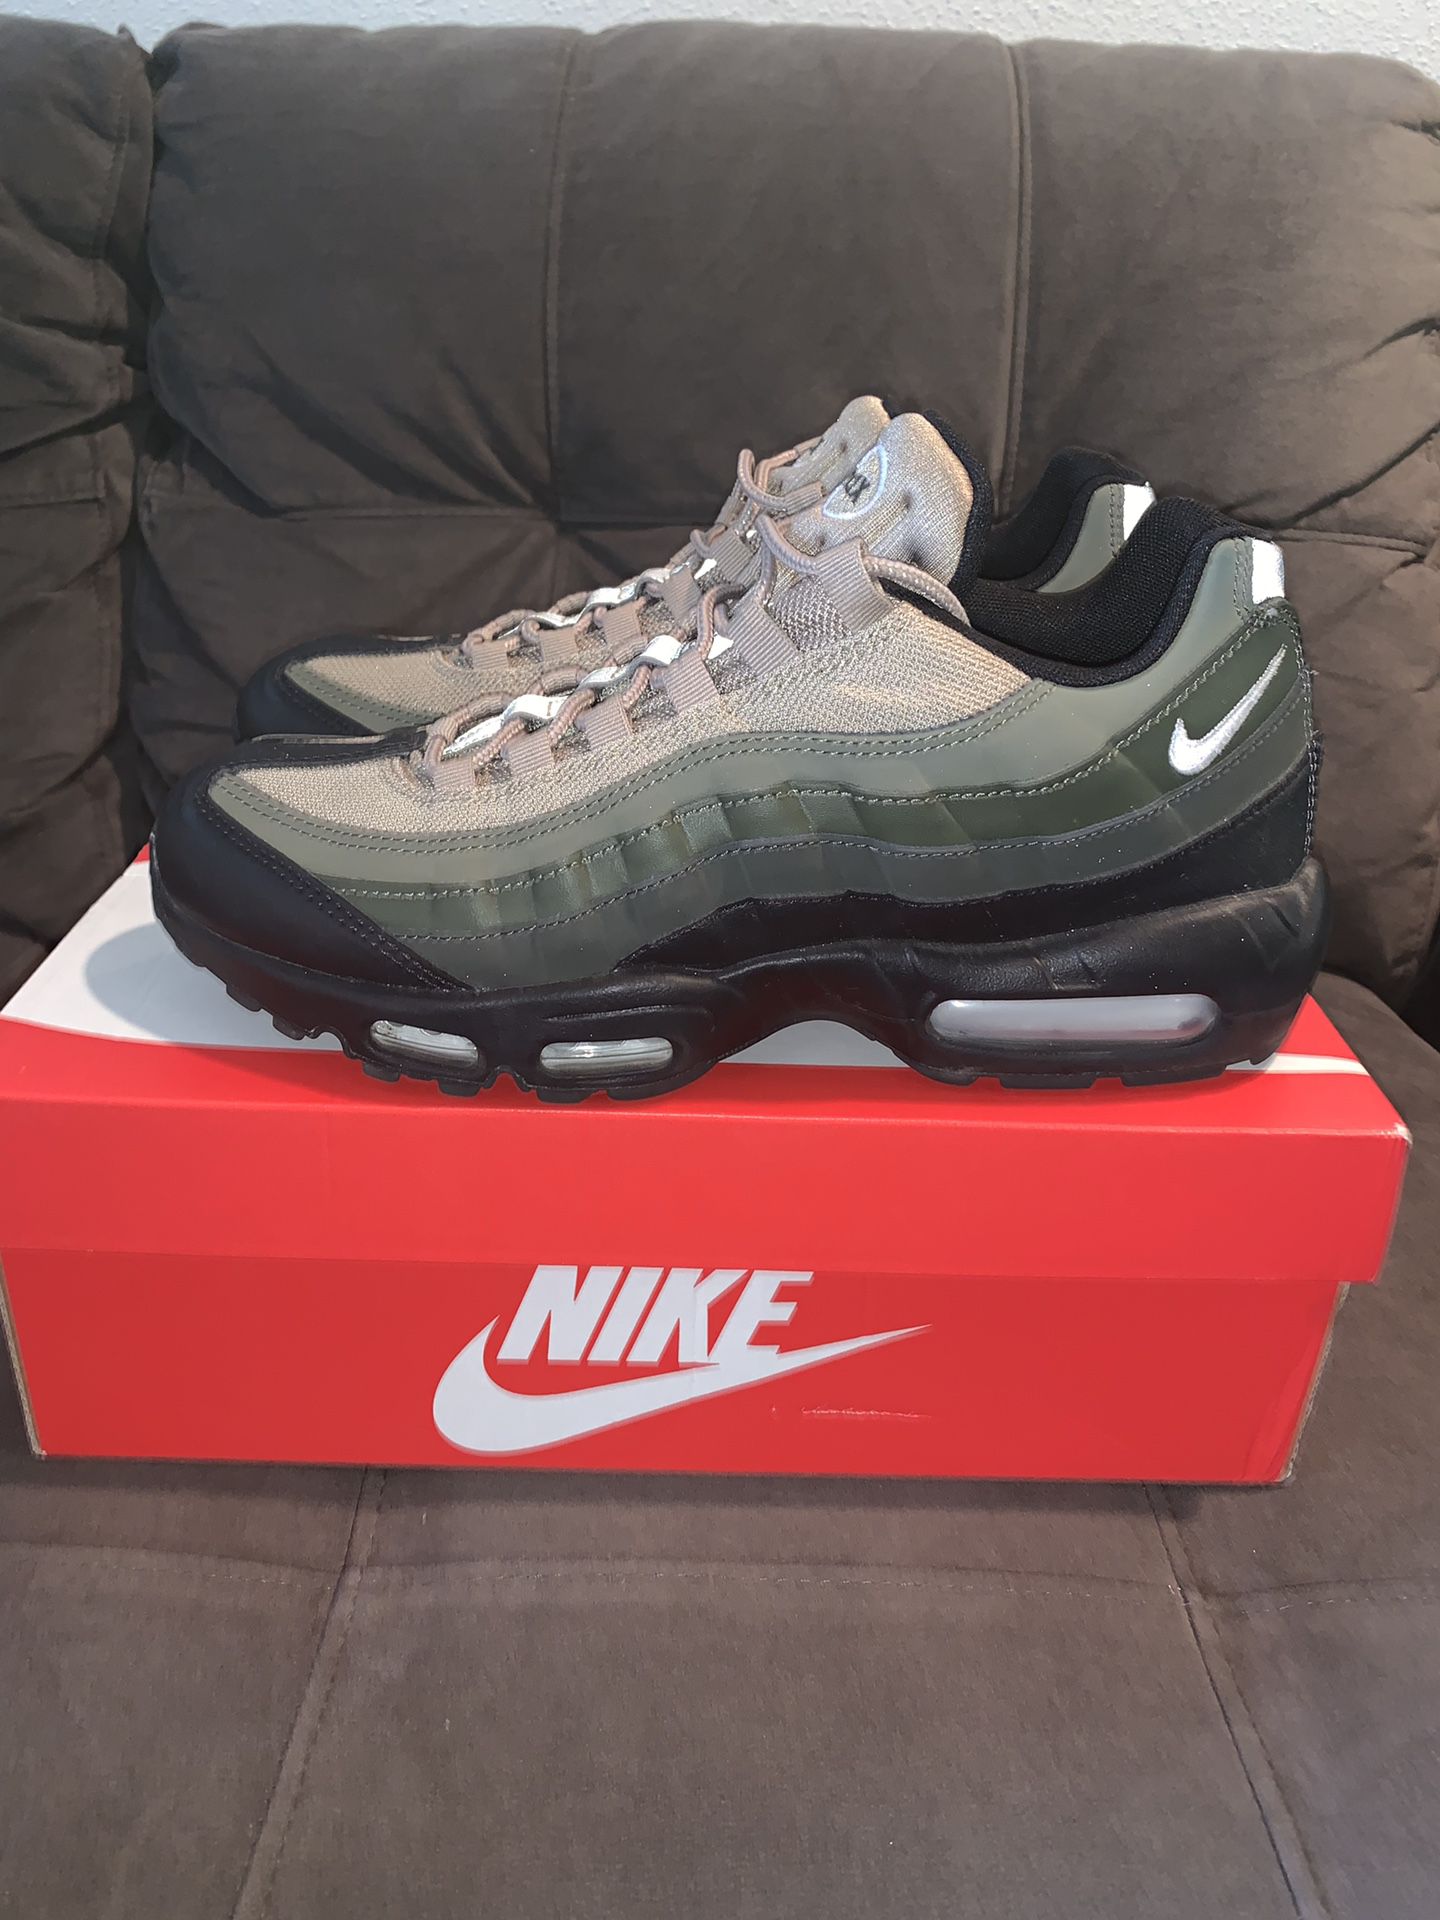 Air max 95 size GREAT CONDITION